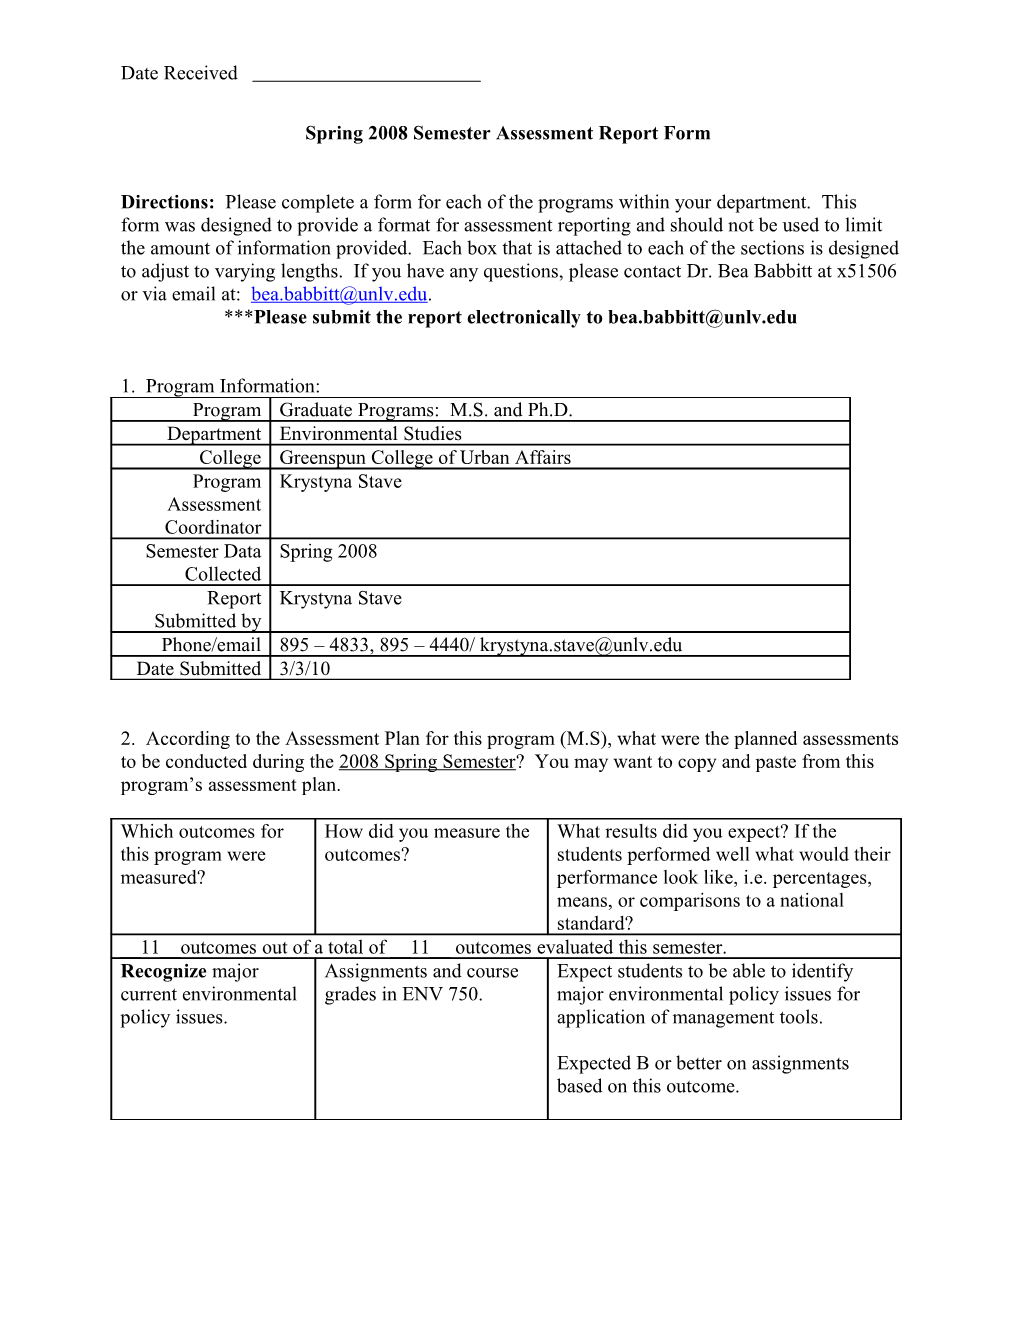 Annual Assessment Report Form for Student Learning Outcomes Assessment s2